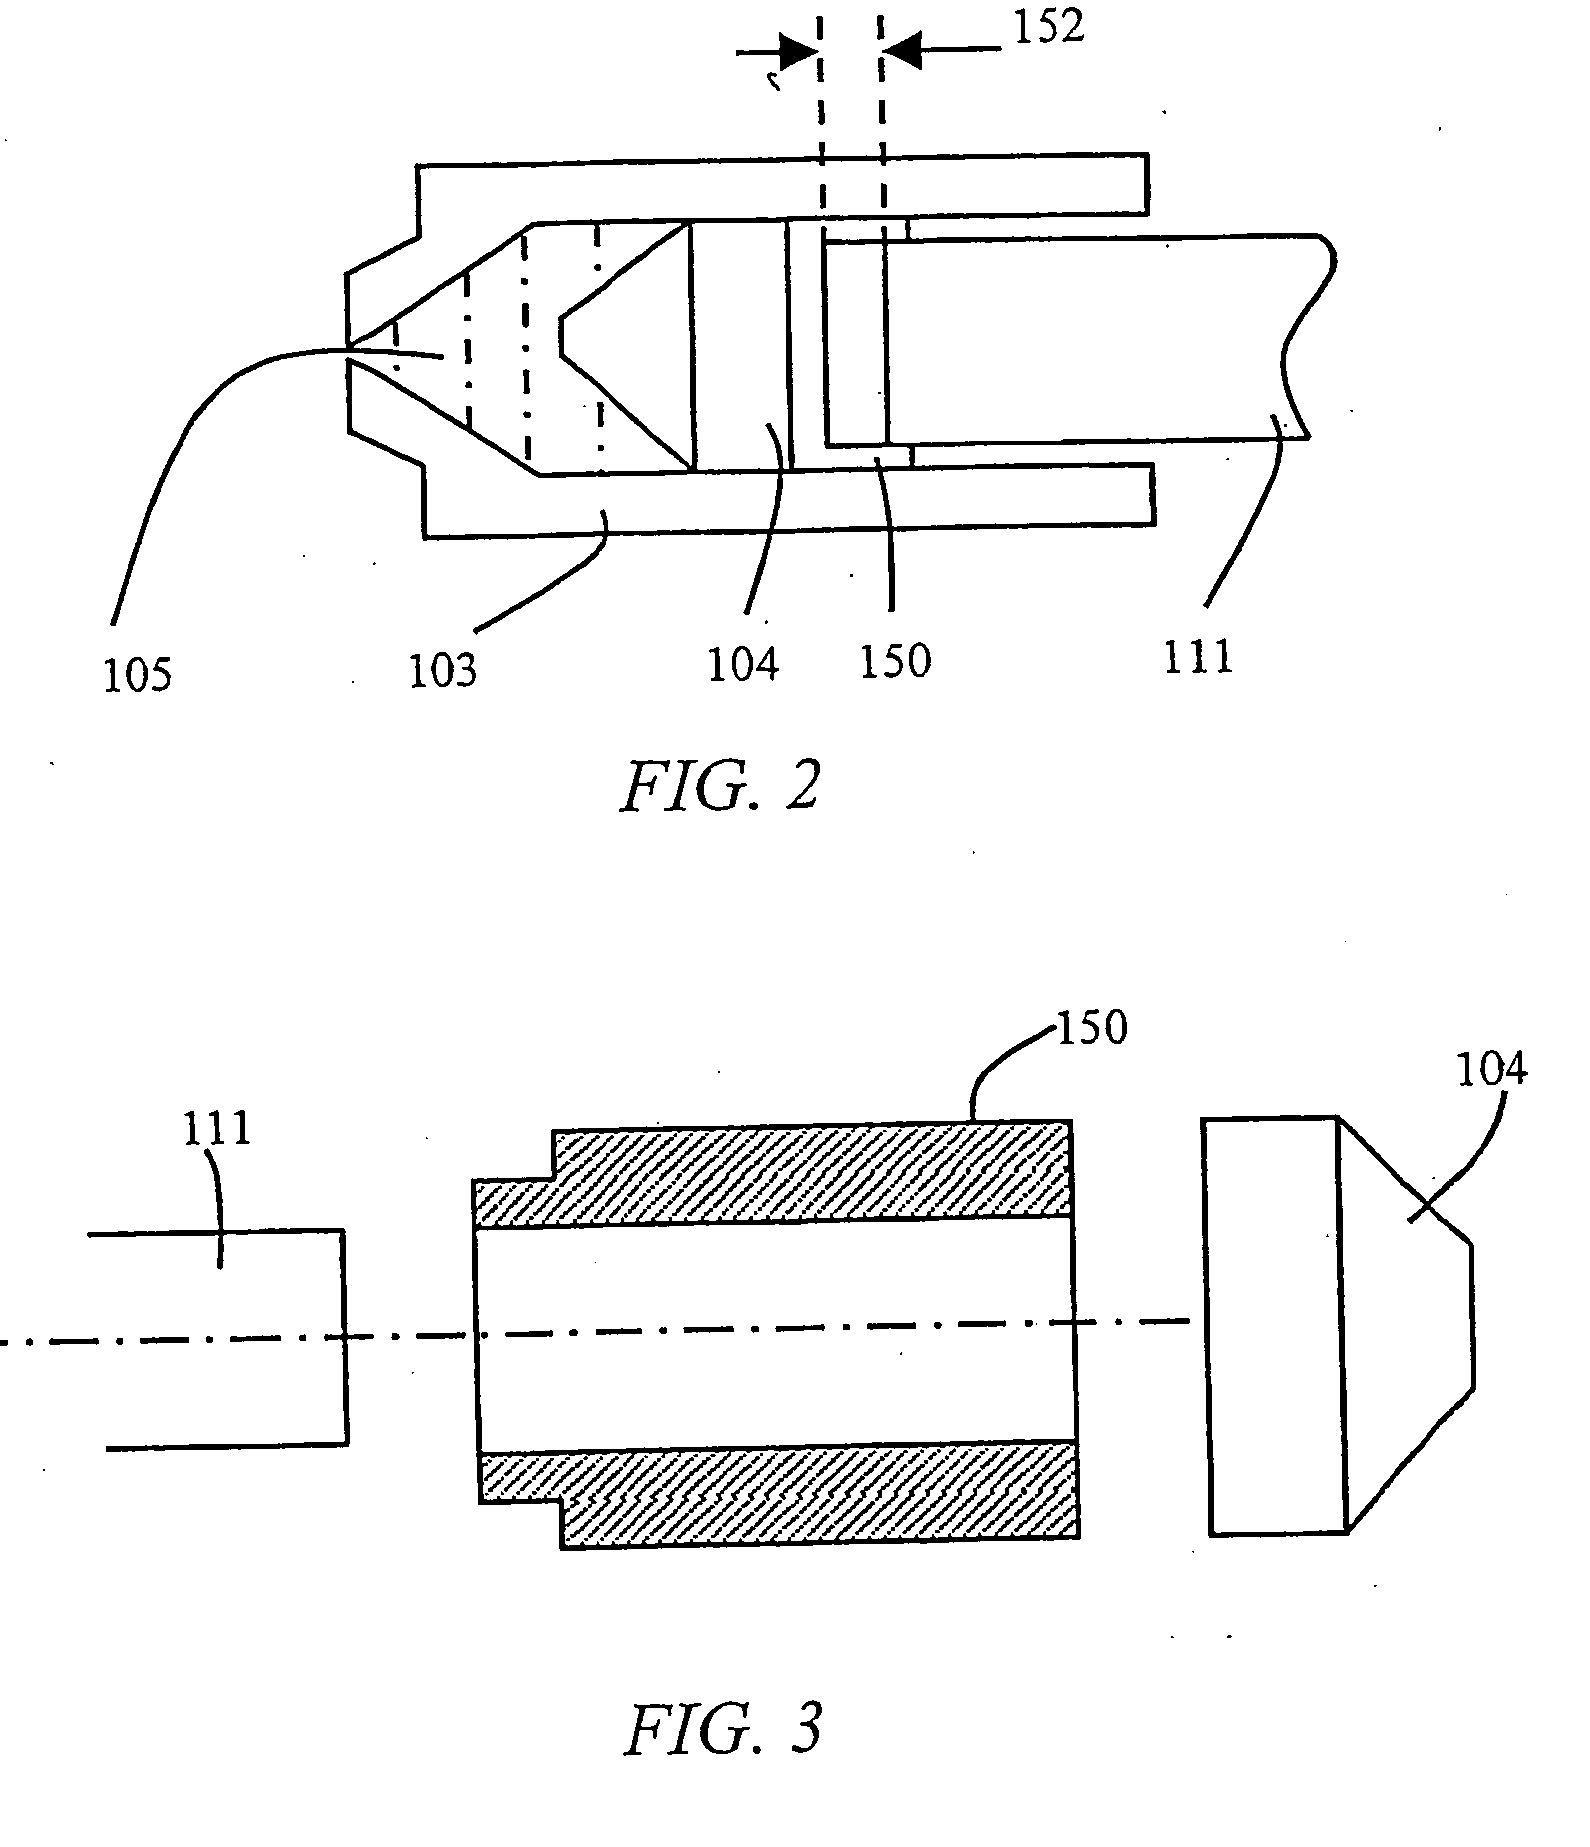 Needleless injector with shock absorbing means between ram and piston